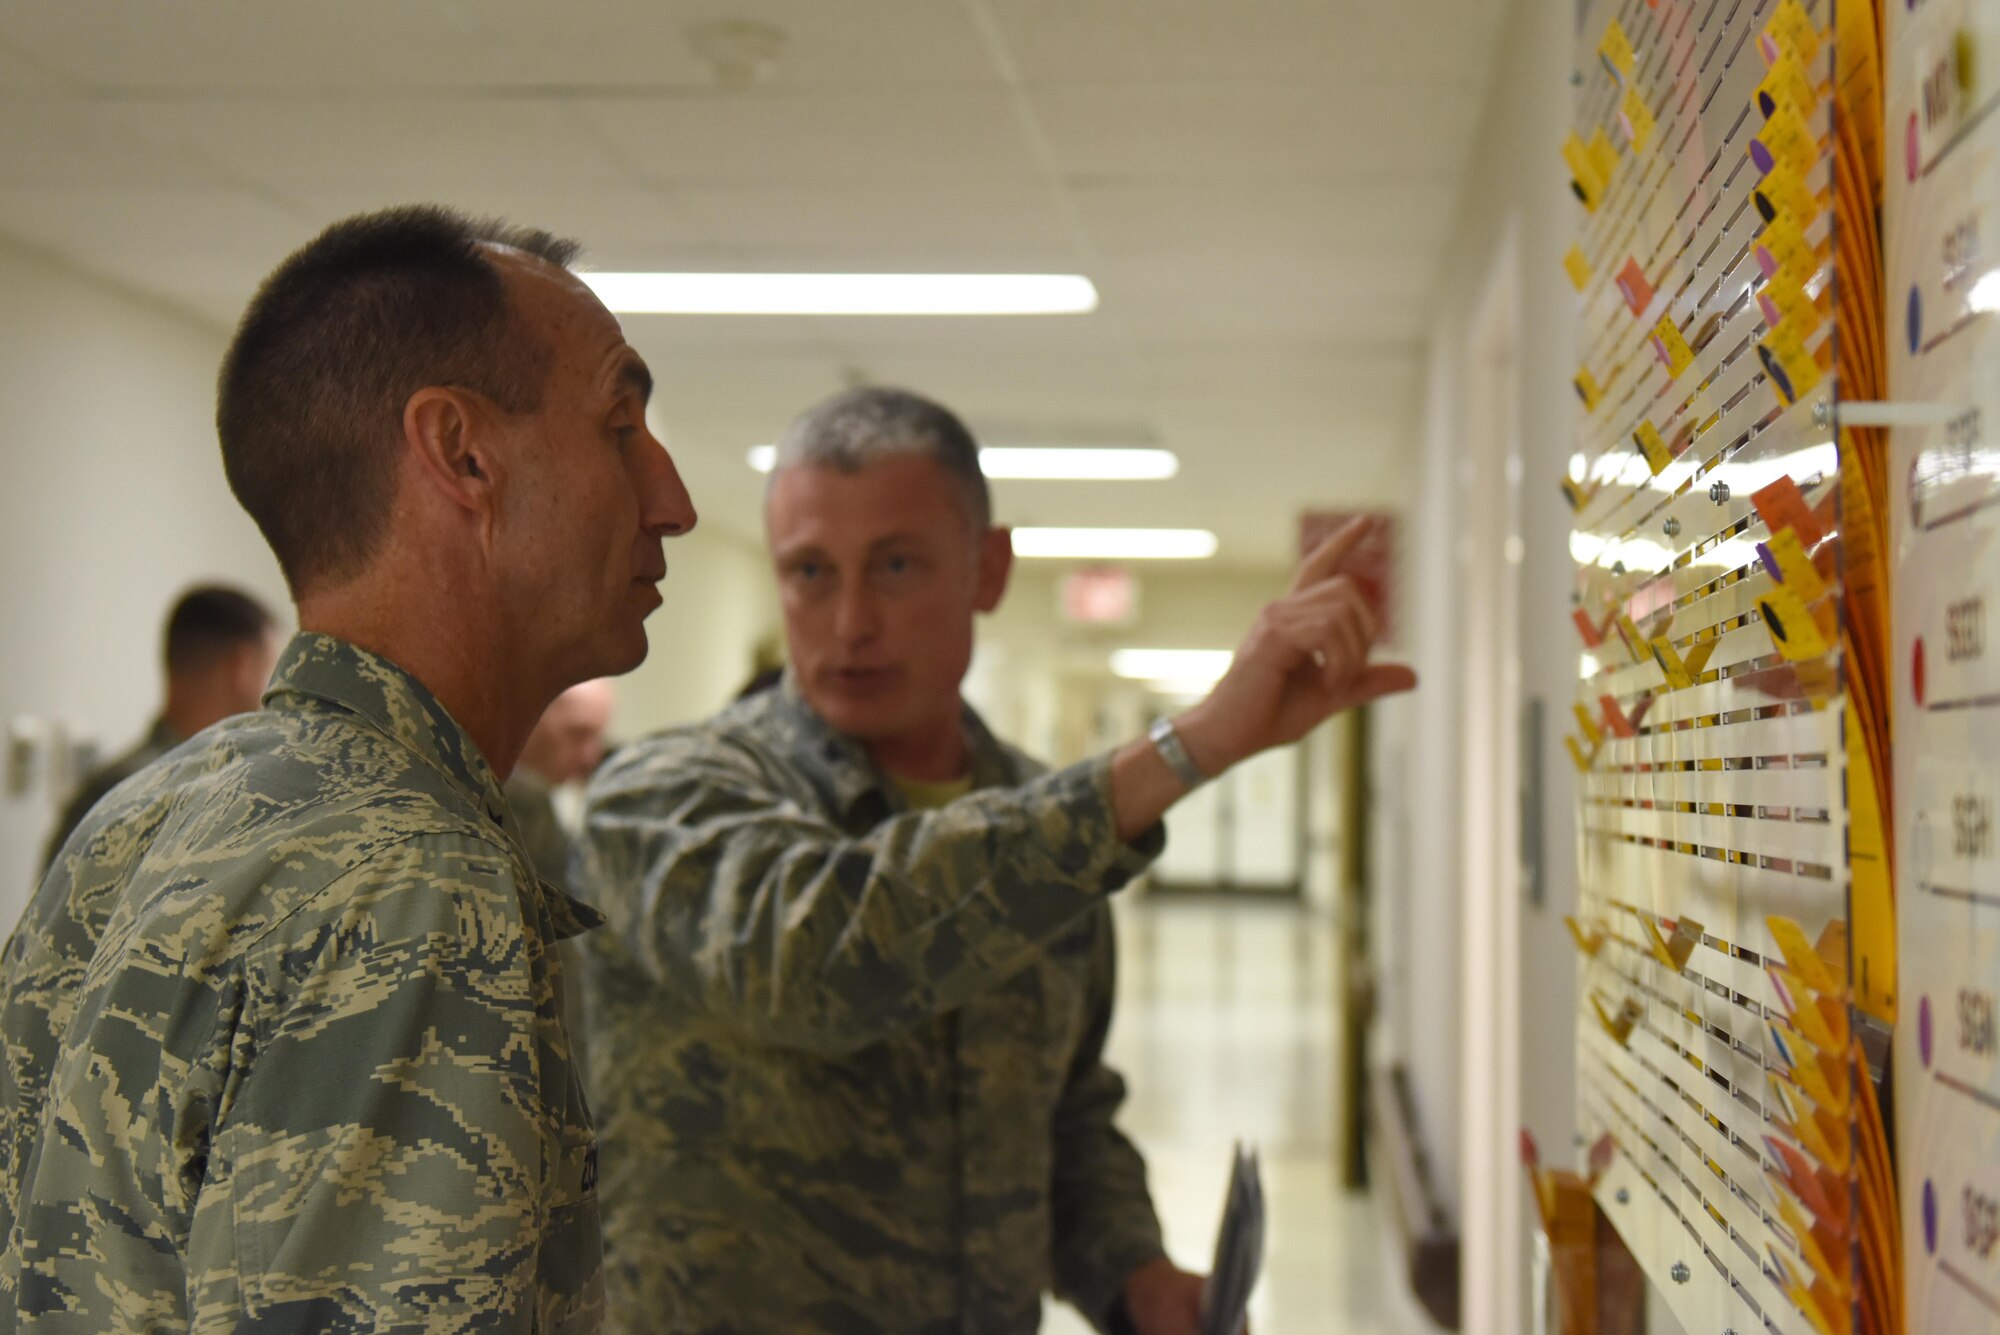 Maj. Gen. Scott Zobrist (left), Ninth Air Force commander, and Col. Paul Conner, 4th Medical Group commander, discuss the changes that have been, and still need to be made, throughout the group during an immersion tour, Aug. 23, 2016, at Seymour Johnson Air Force Base, North Carolina. During the tour, Connor presented a slideshow of each of the squadrons’ improvements and briefed Zobrist on day-to-day happenings. (U.S. Air Force photo by Airman 1st Class Ashley Williamson)